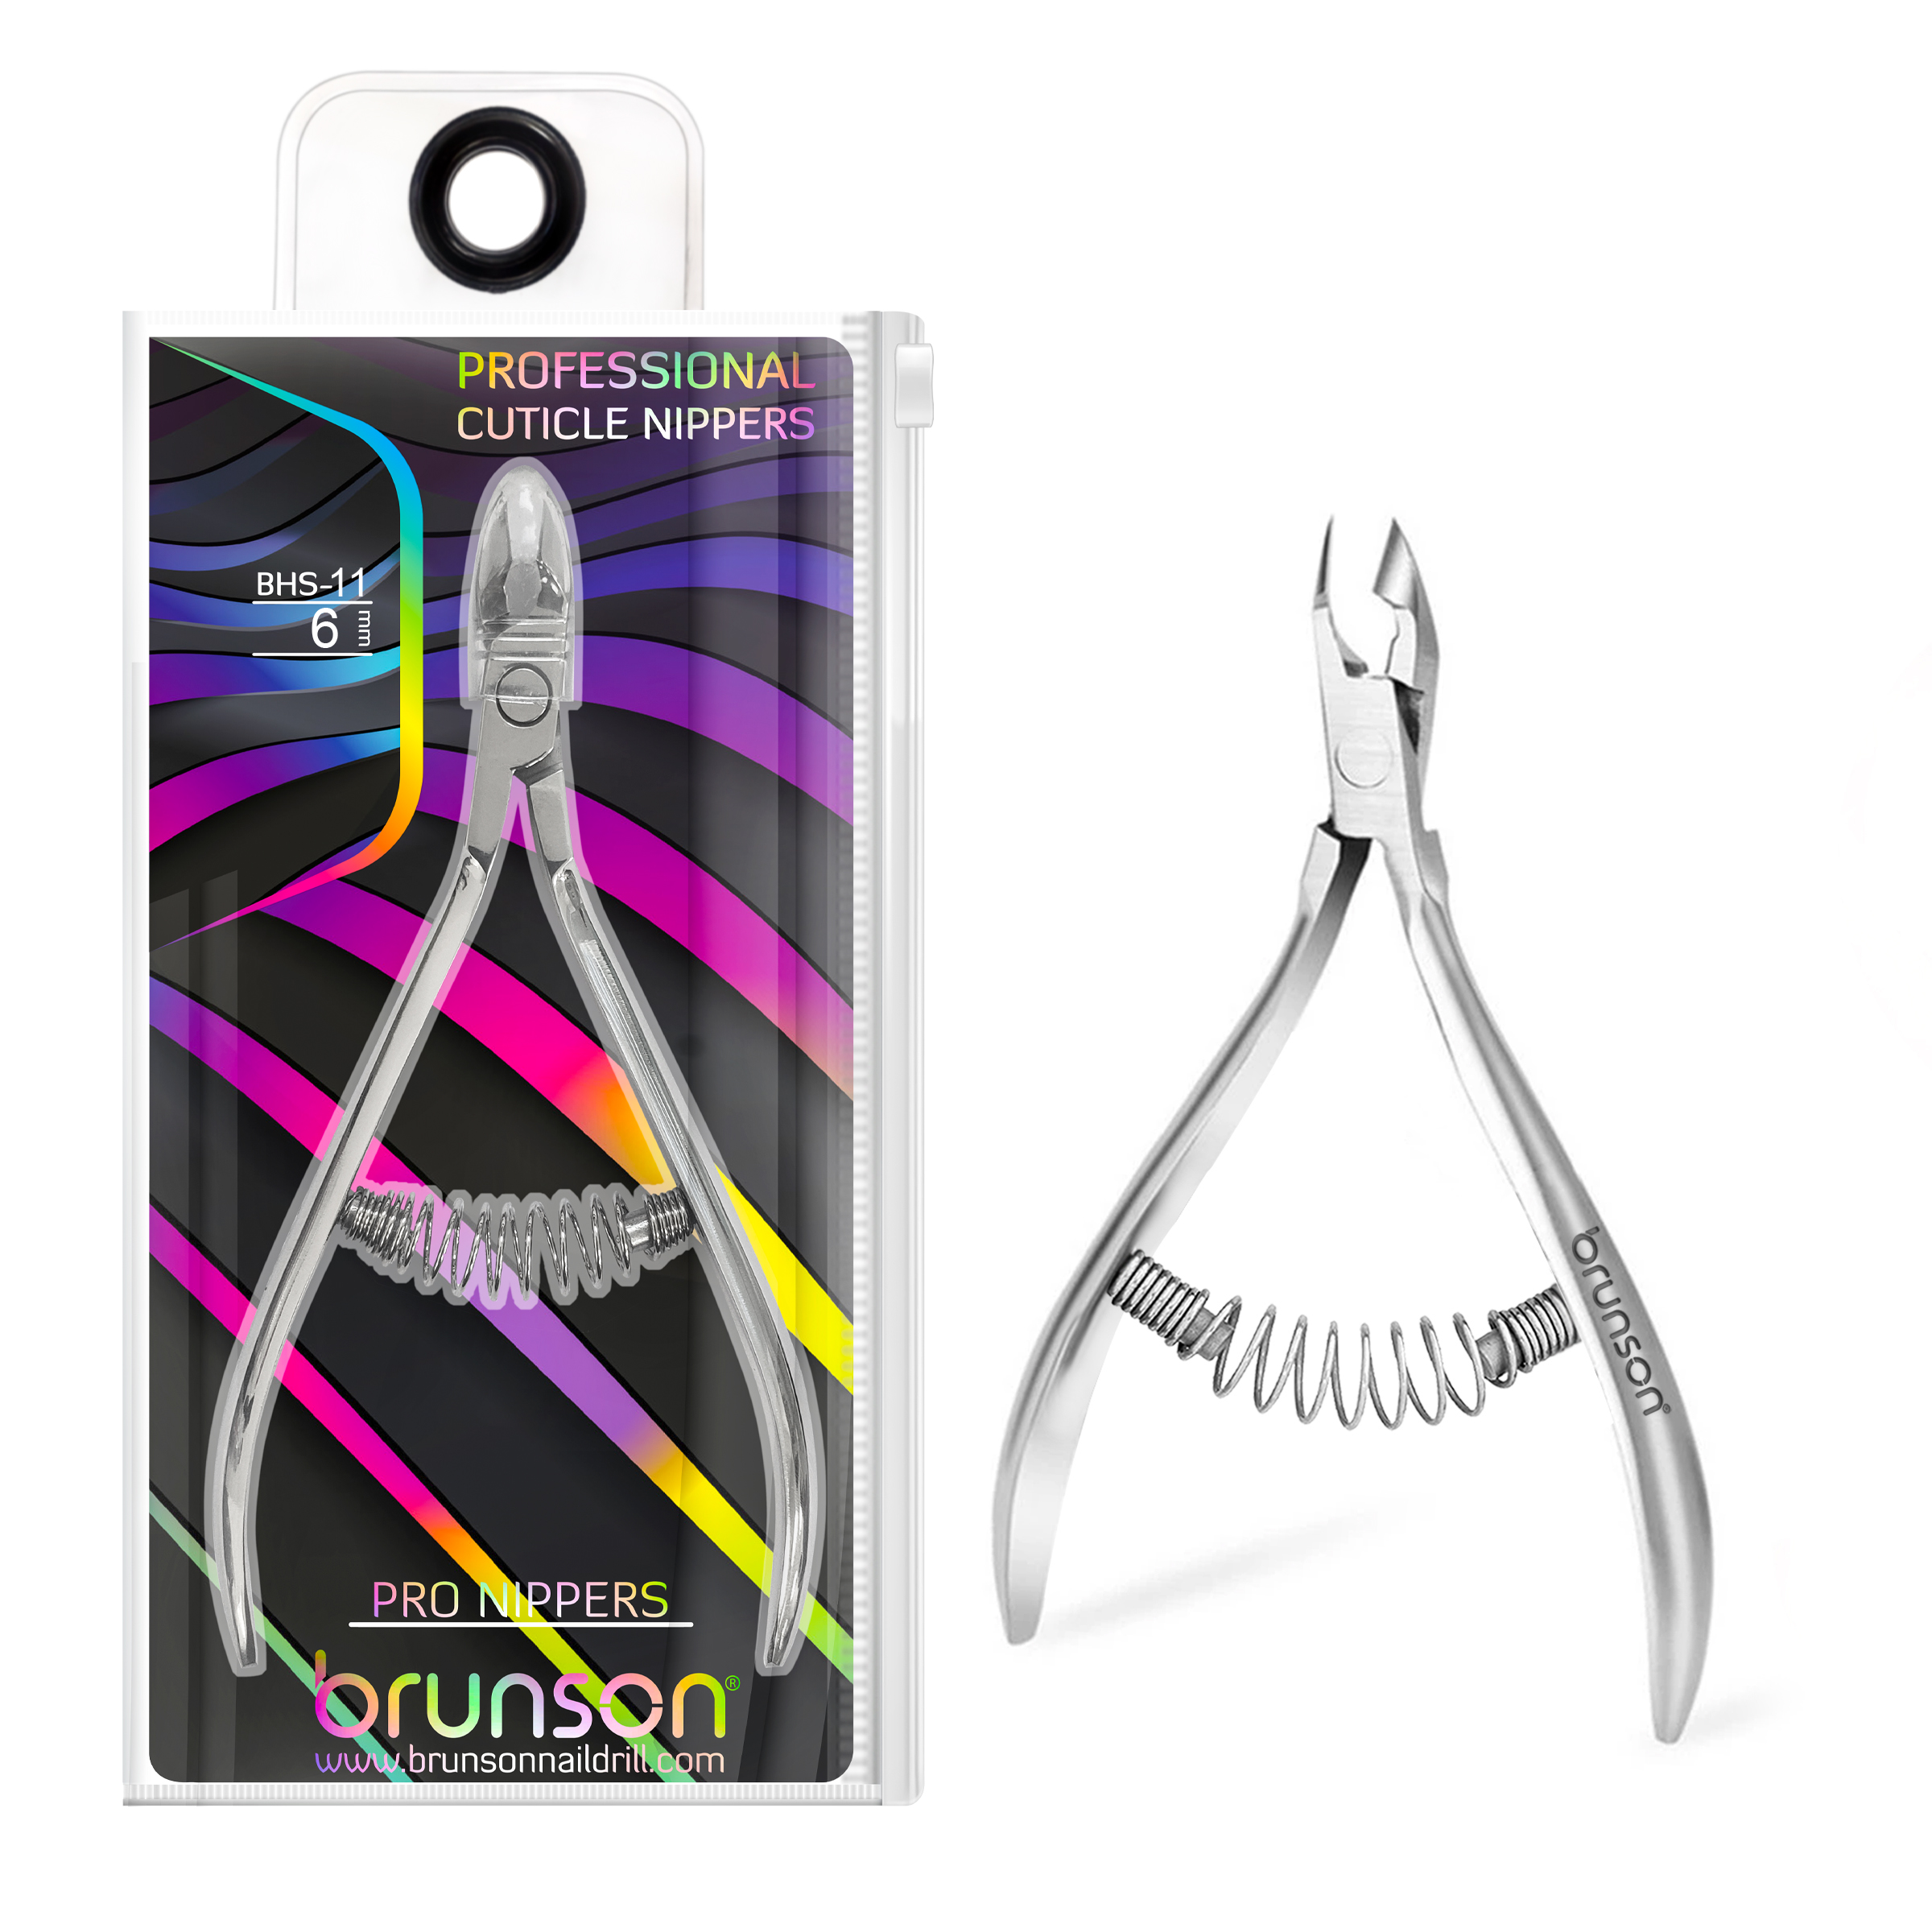 Professional Cuticle Nippers 11-6mm